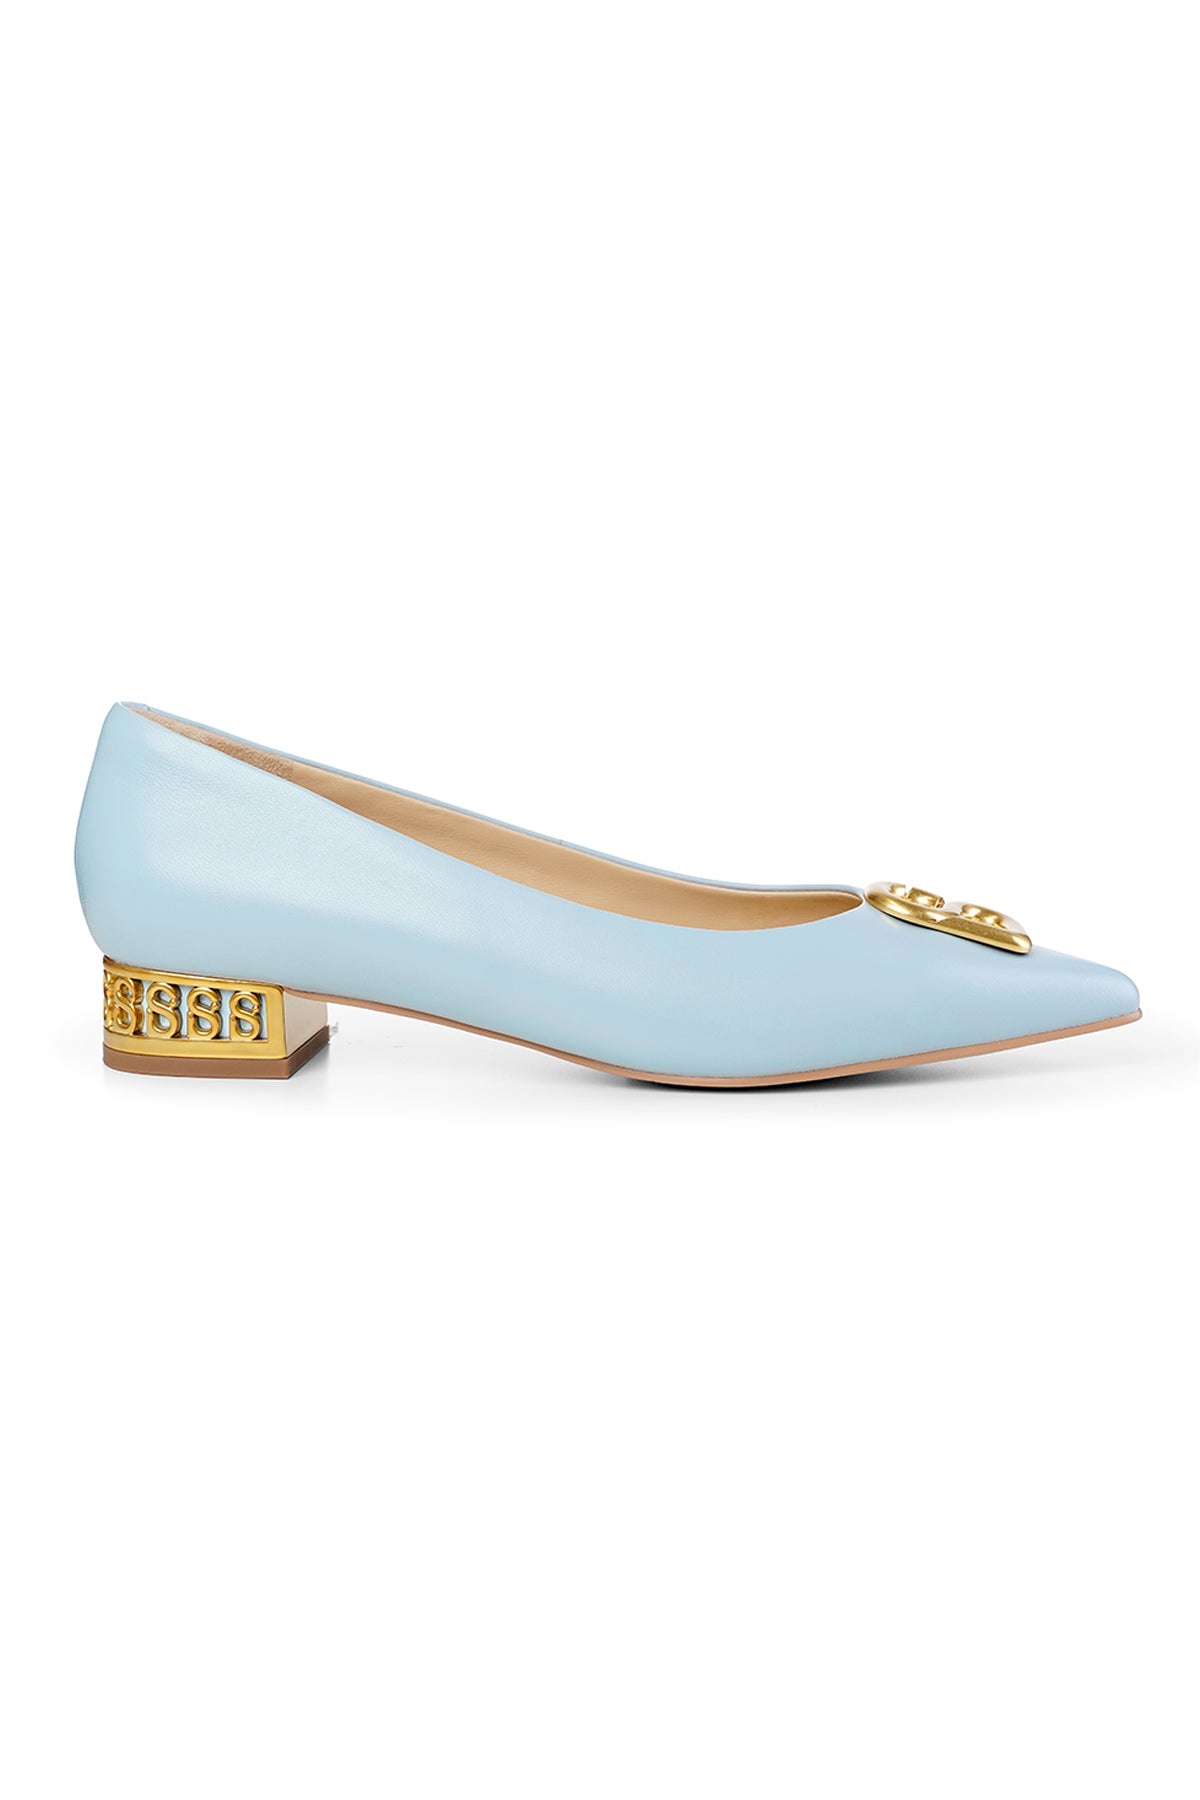 Milly Pump Shoes - Blue